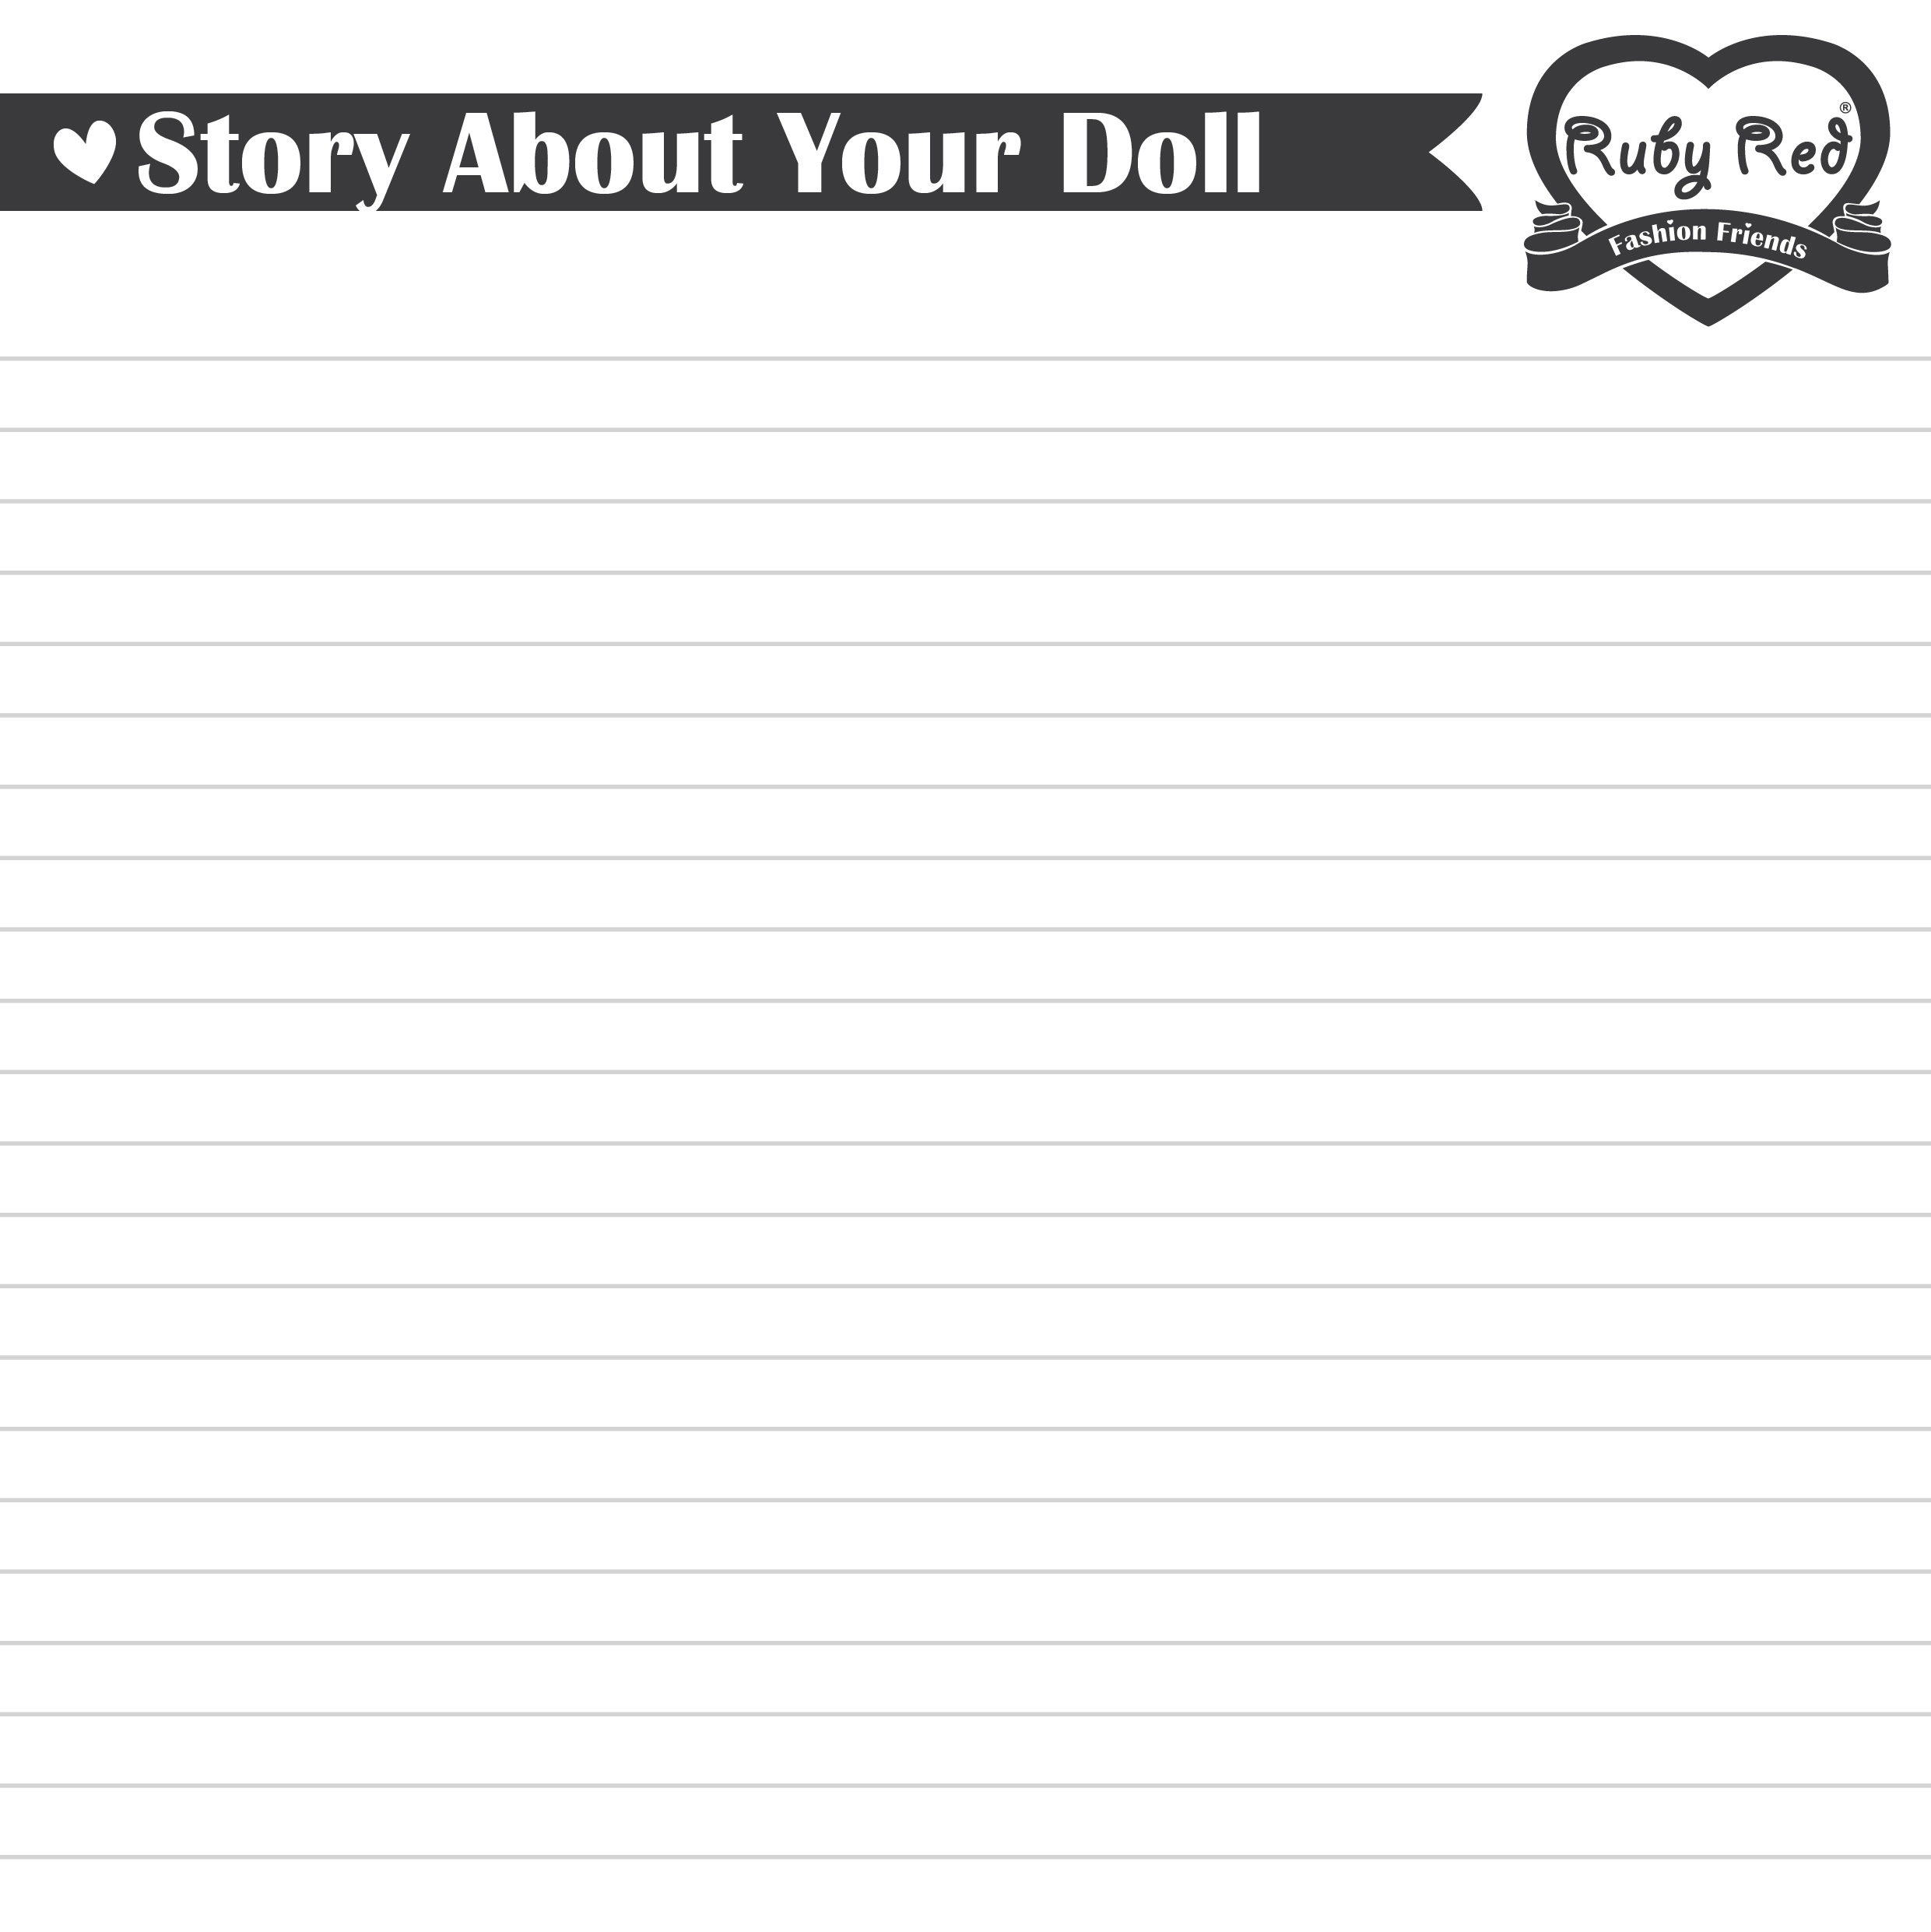 Create Your Dream Doll - story worksheet